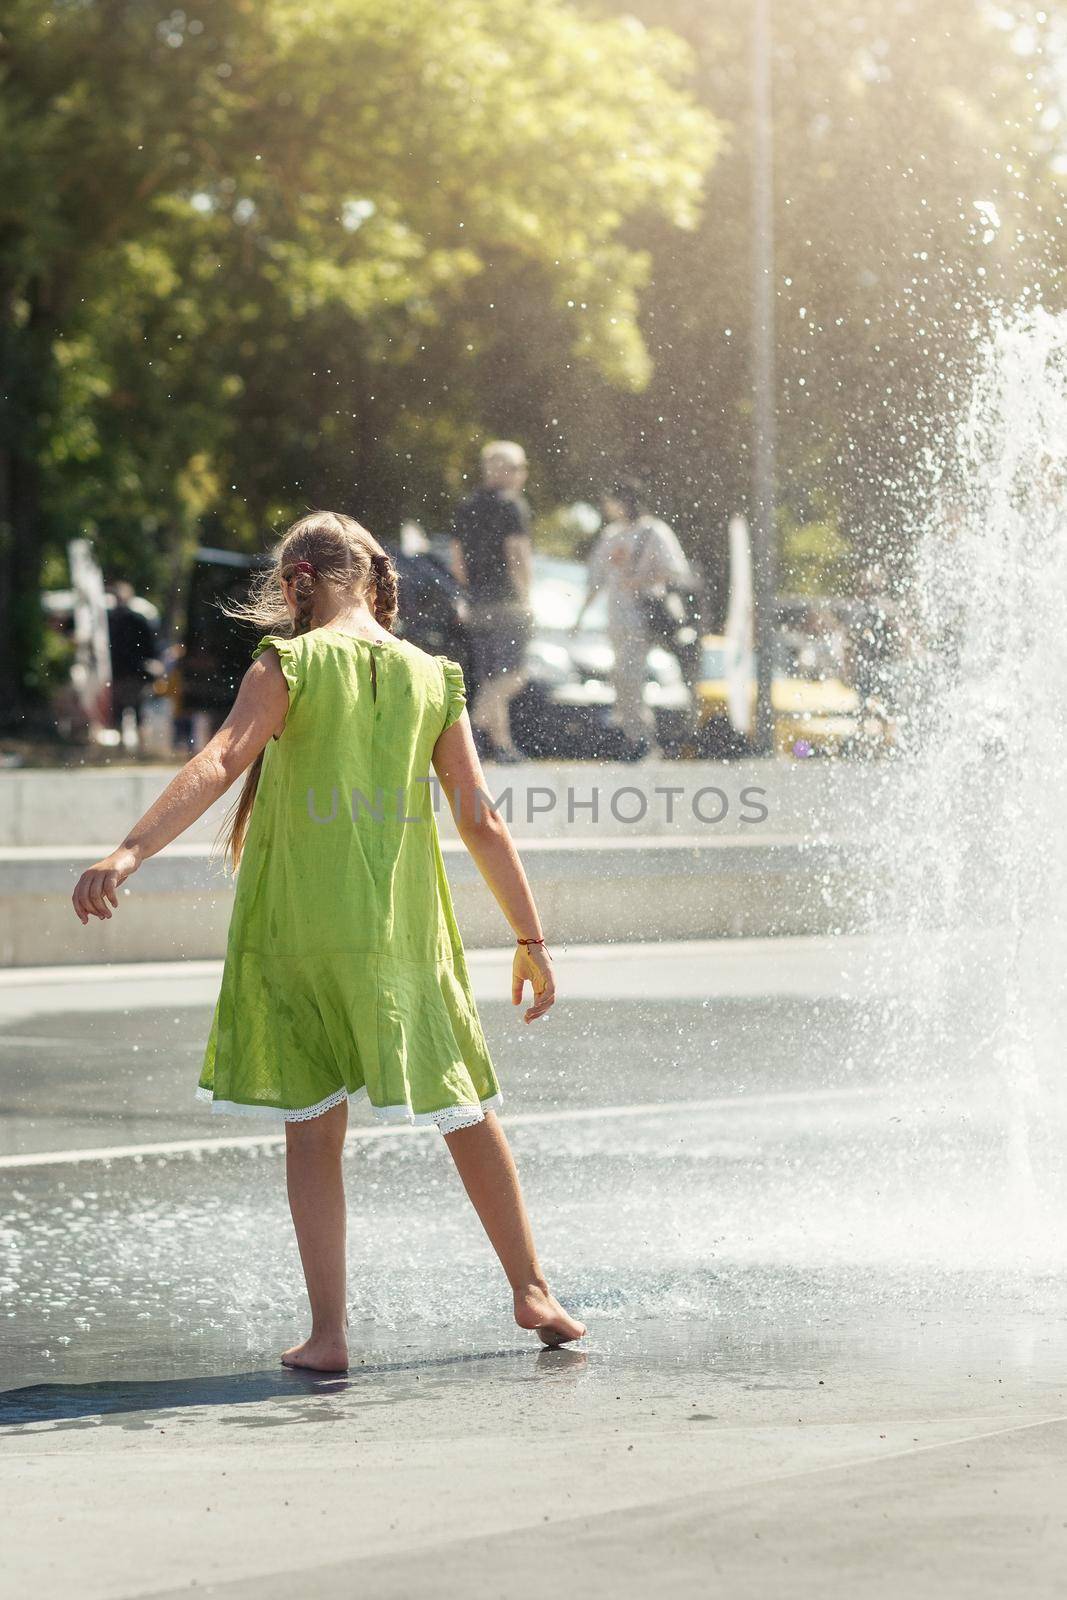 A young girl in a light green dress barefoot dances by a fountain in the city center.